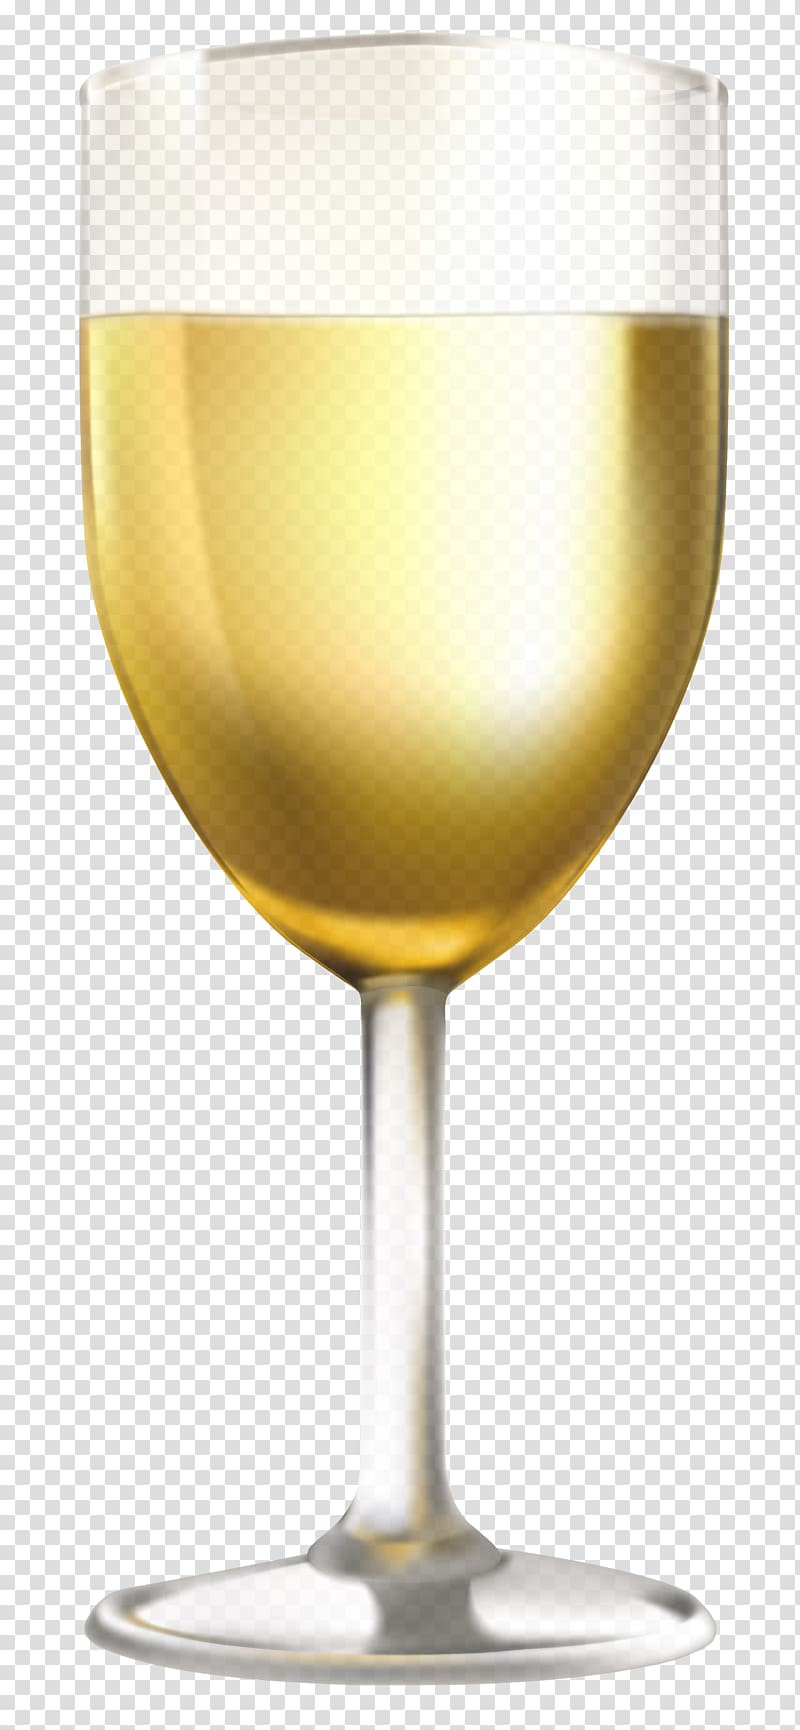 wine glass illustration, White wine Red Wine Cocktail Wine glass, White Wine Glass transparent background PNG clipart